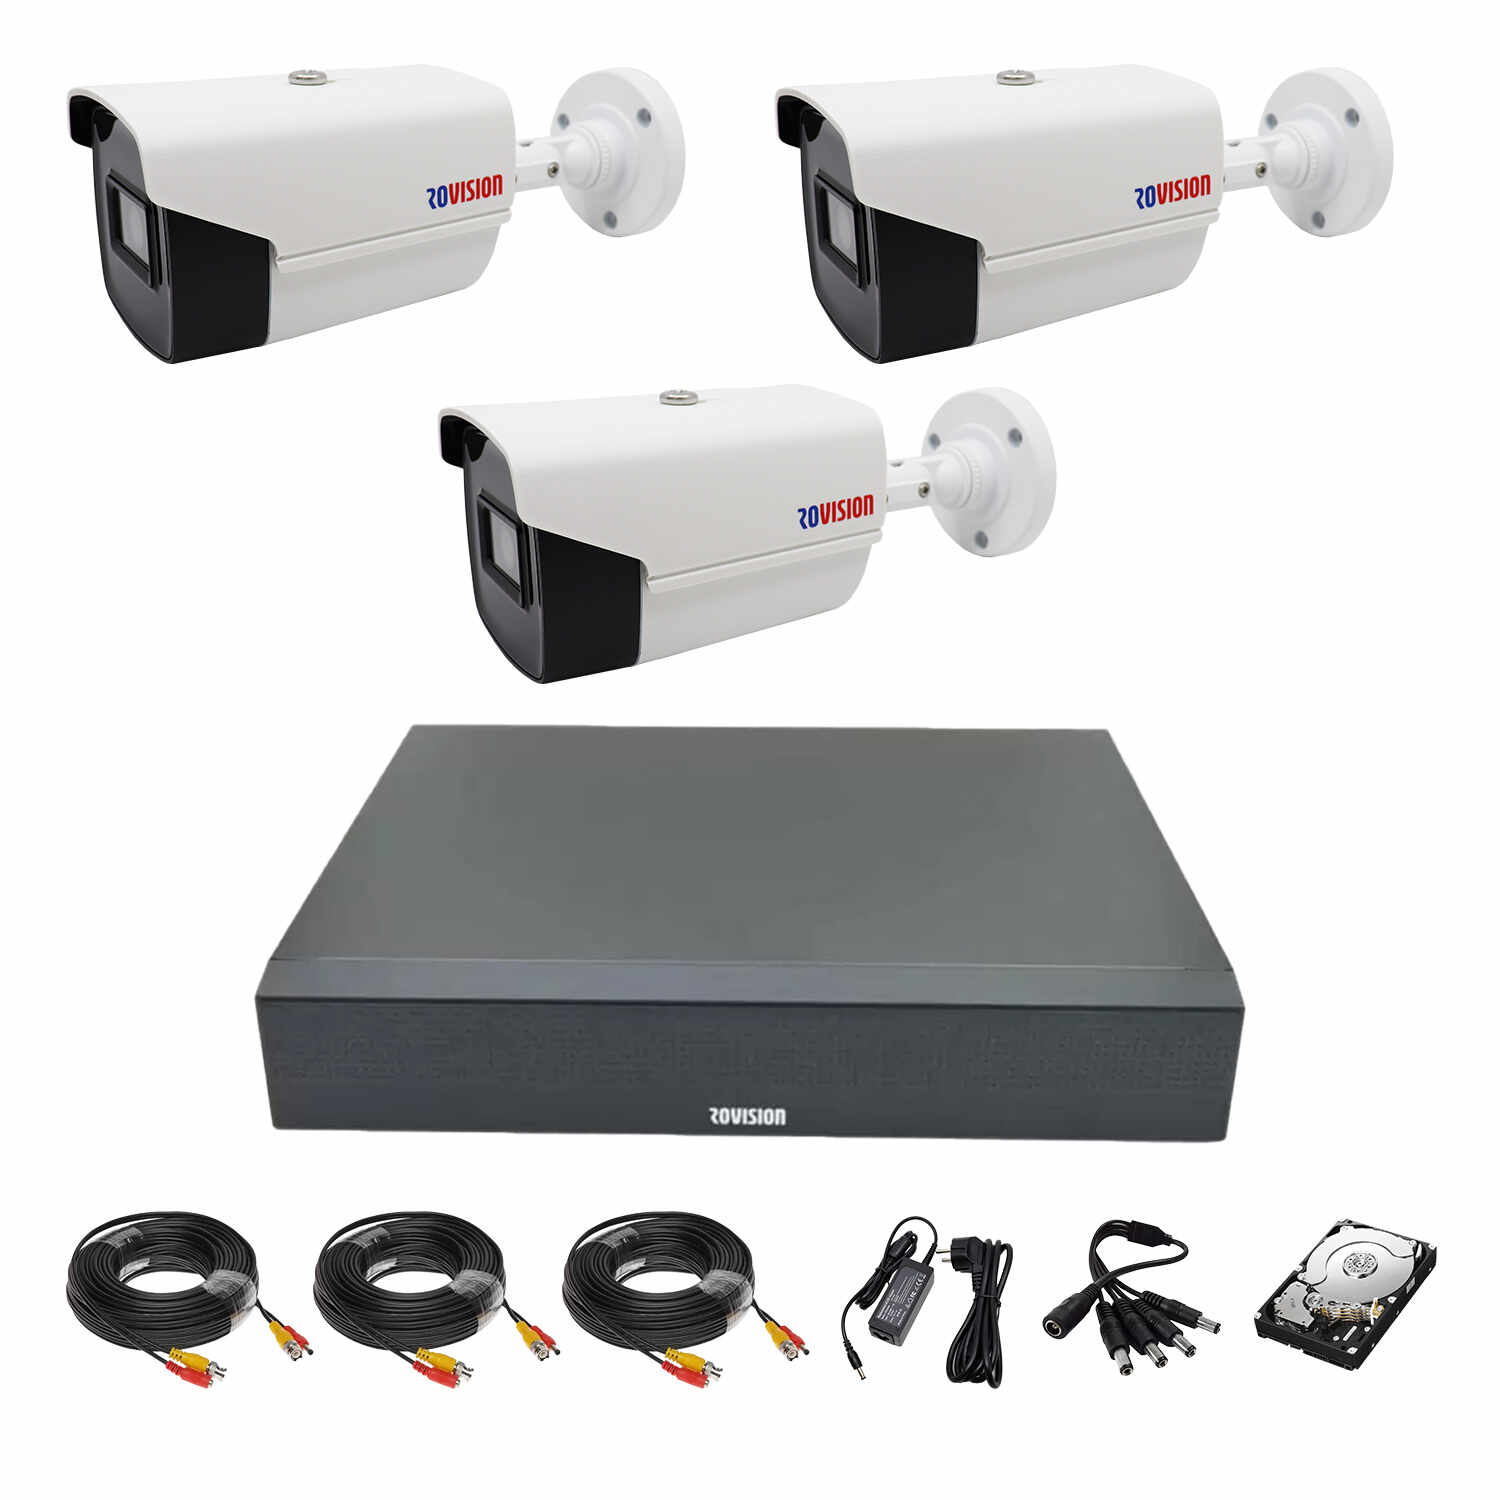 Sistem Supraveghere video, 3 camere exterior 2 MP, IR 40m, DVR 4 canale, accesorii full, HDD 500 GB